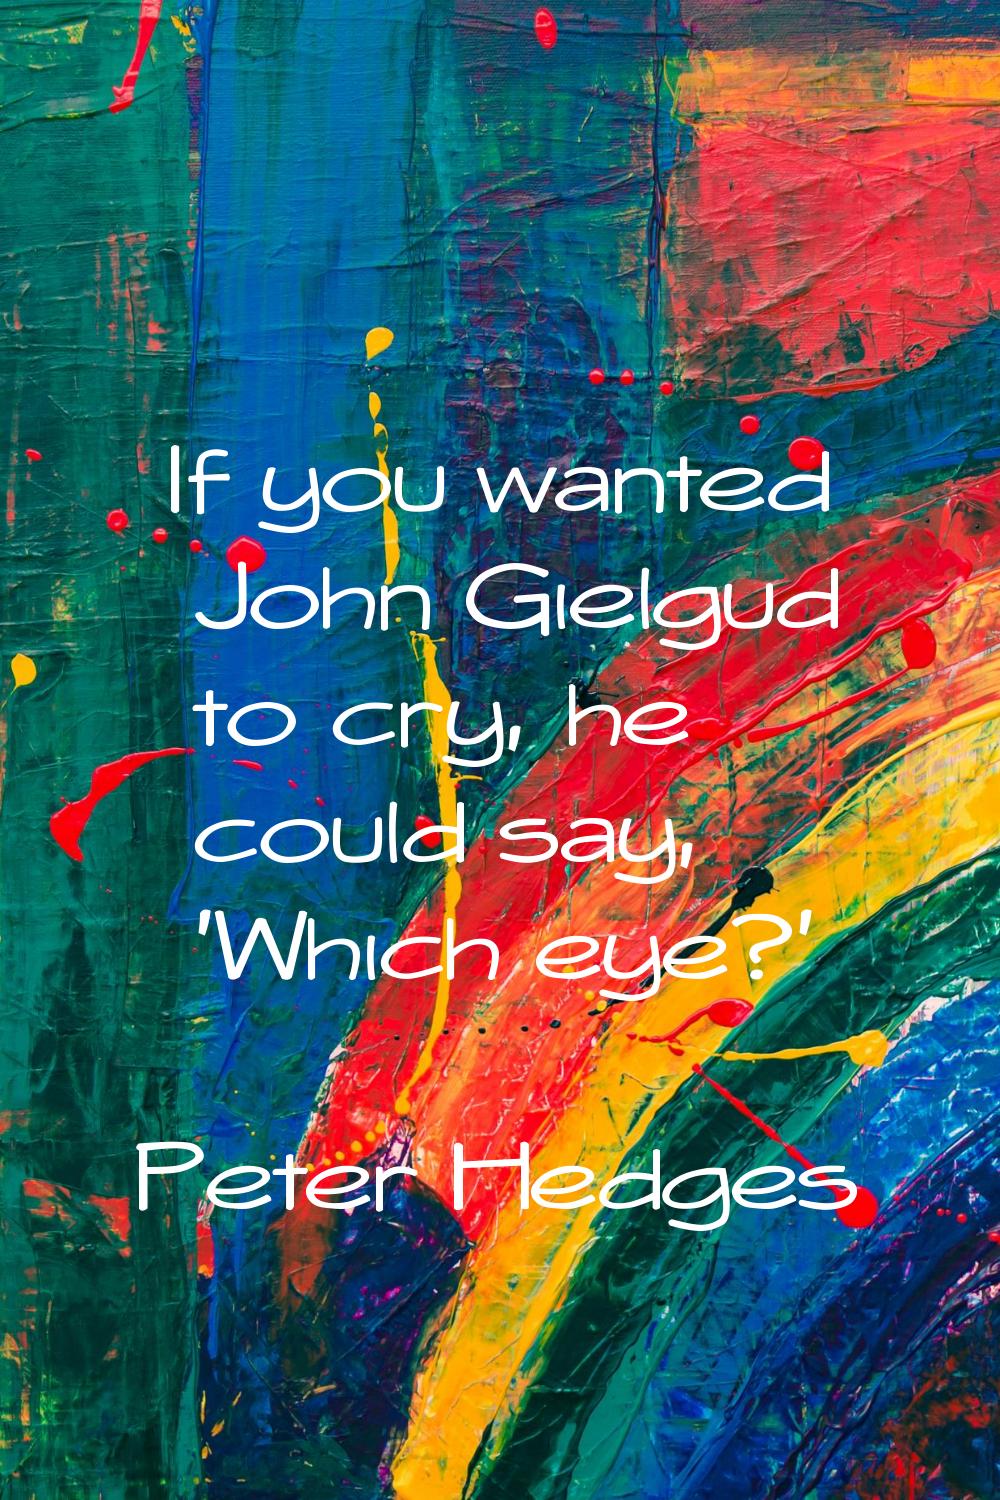 If you wanted John Gielgud to cry, he could say, 'Which eye?'